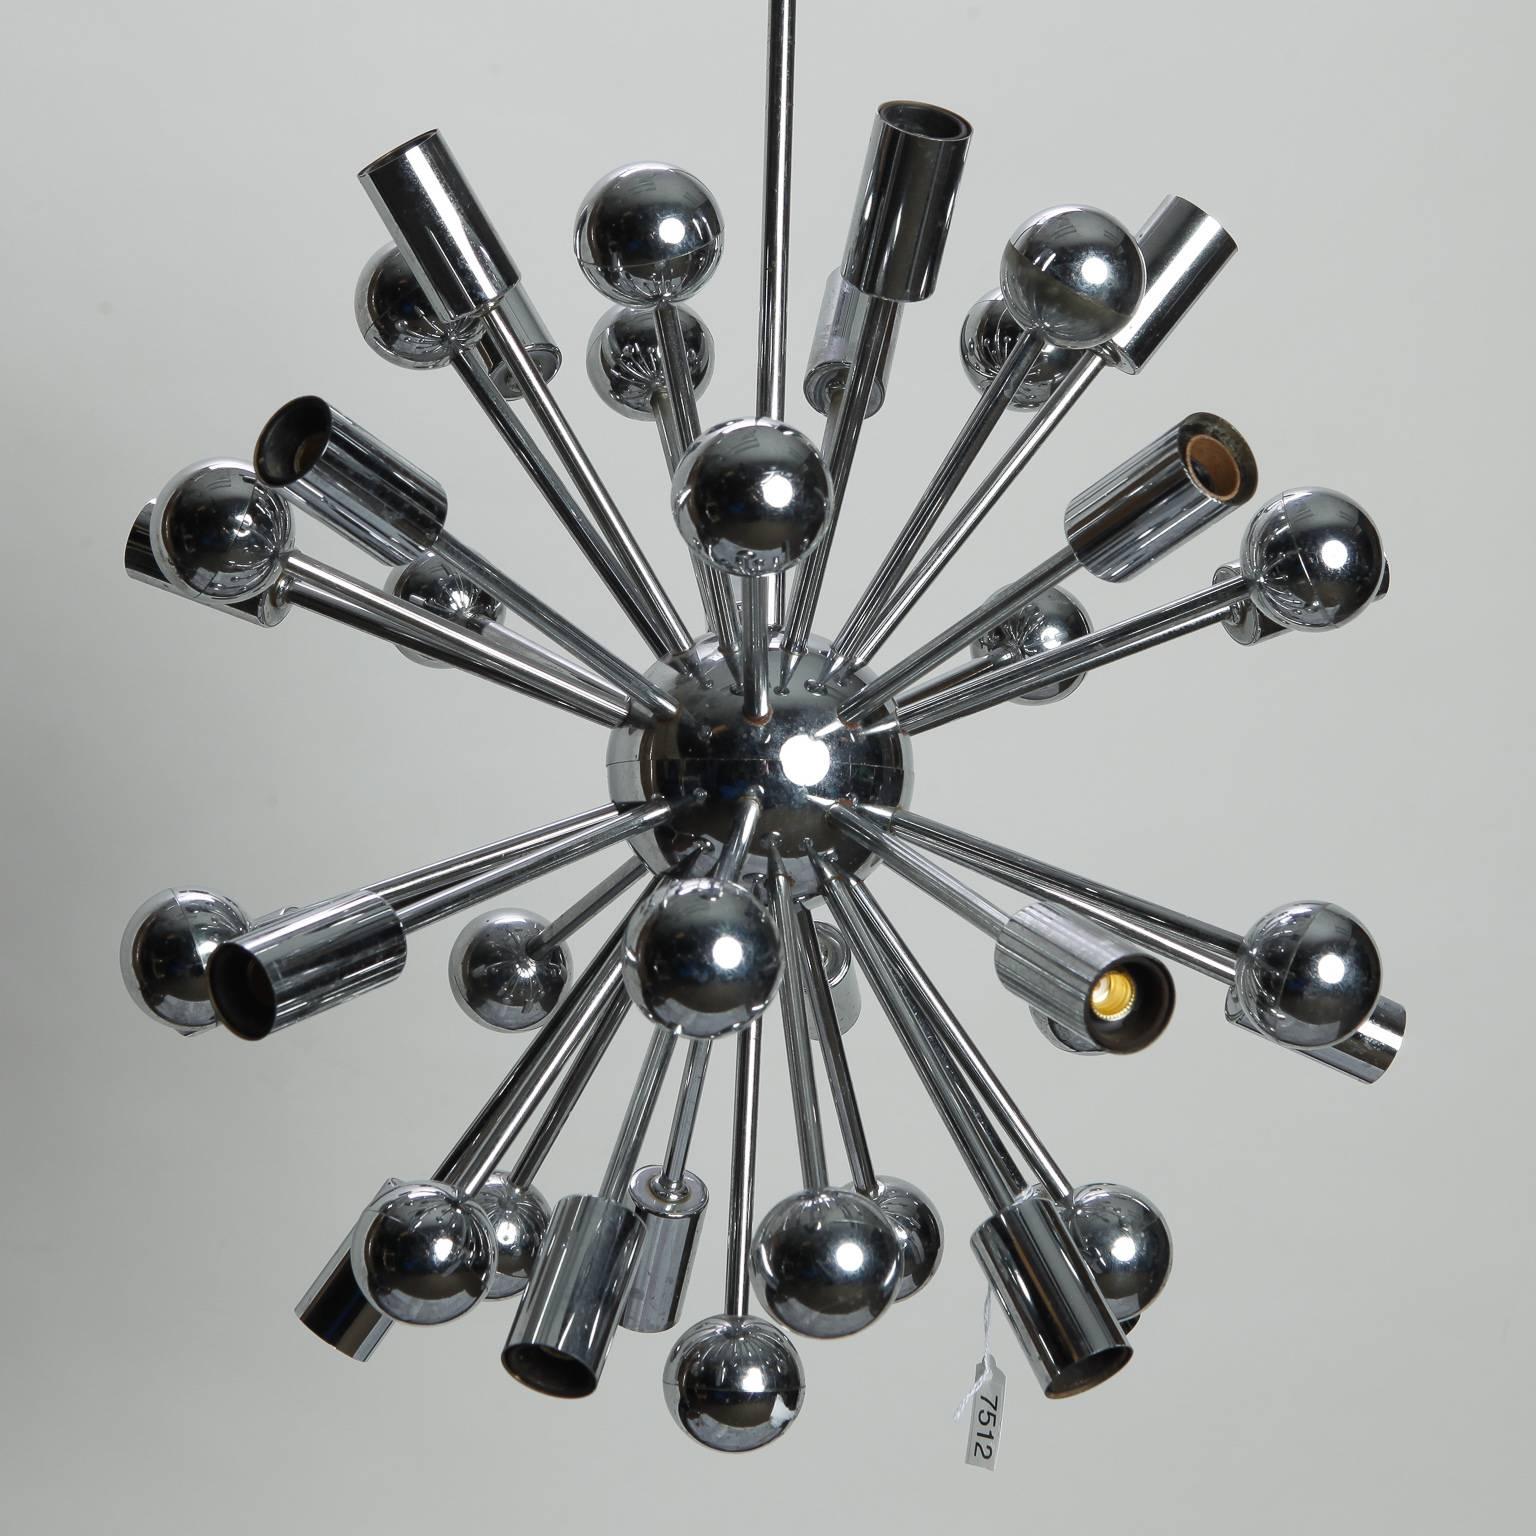 Chrome 20-light Sputnik style chandelier, circa 1970s. Found in Belgium, this orb shaped fixture has a chromed metal base with several arms terminating in 20 candelabra sockets and chromed plastic globes. Chromed ceiling canopy. New wiring for US